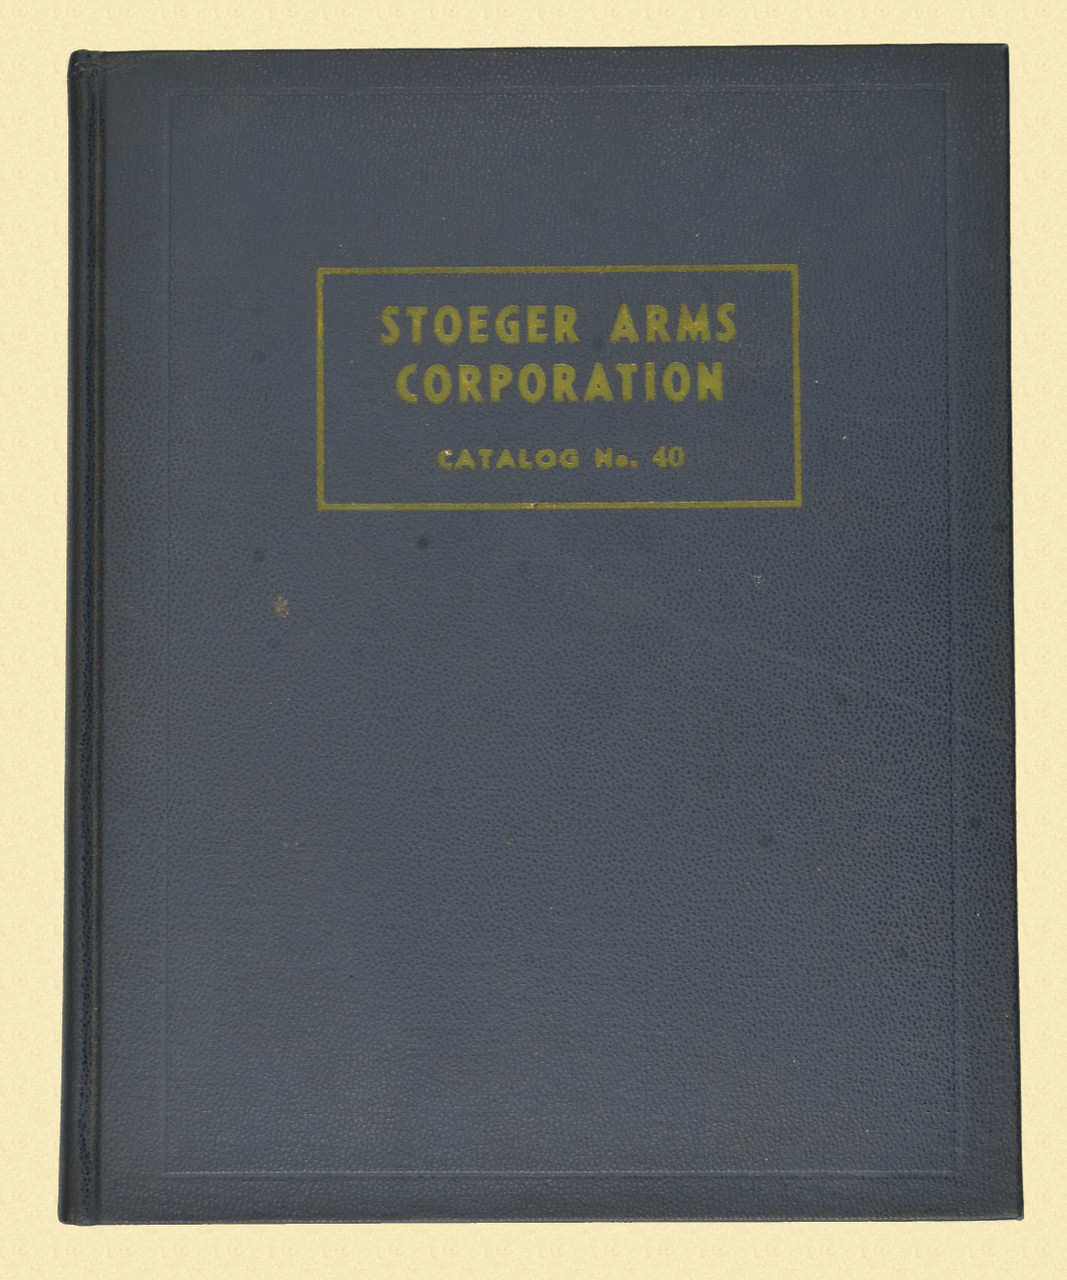 BOOK STOEGER ARMS CORPORATION CATALOG № 40 Hardcover - M10266